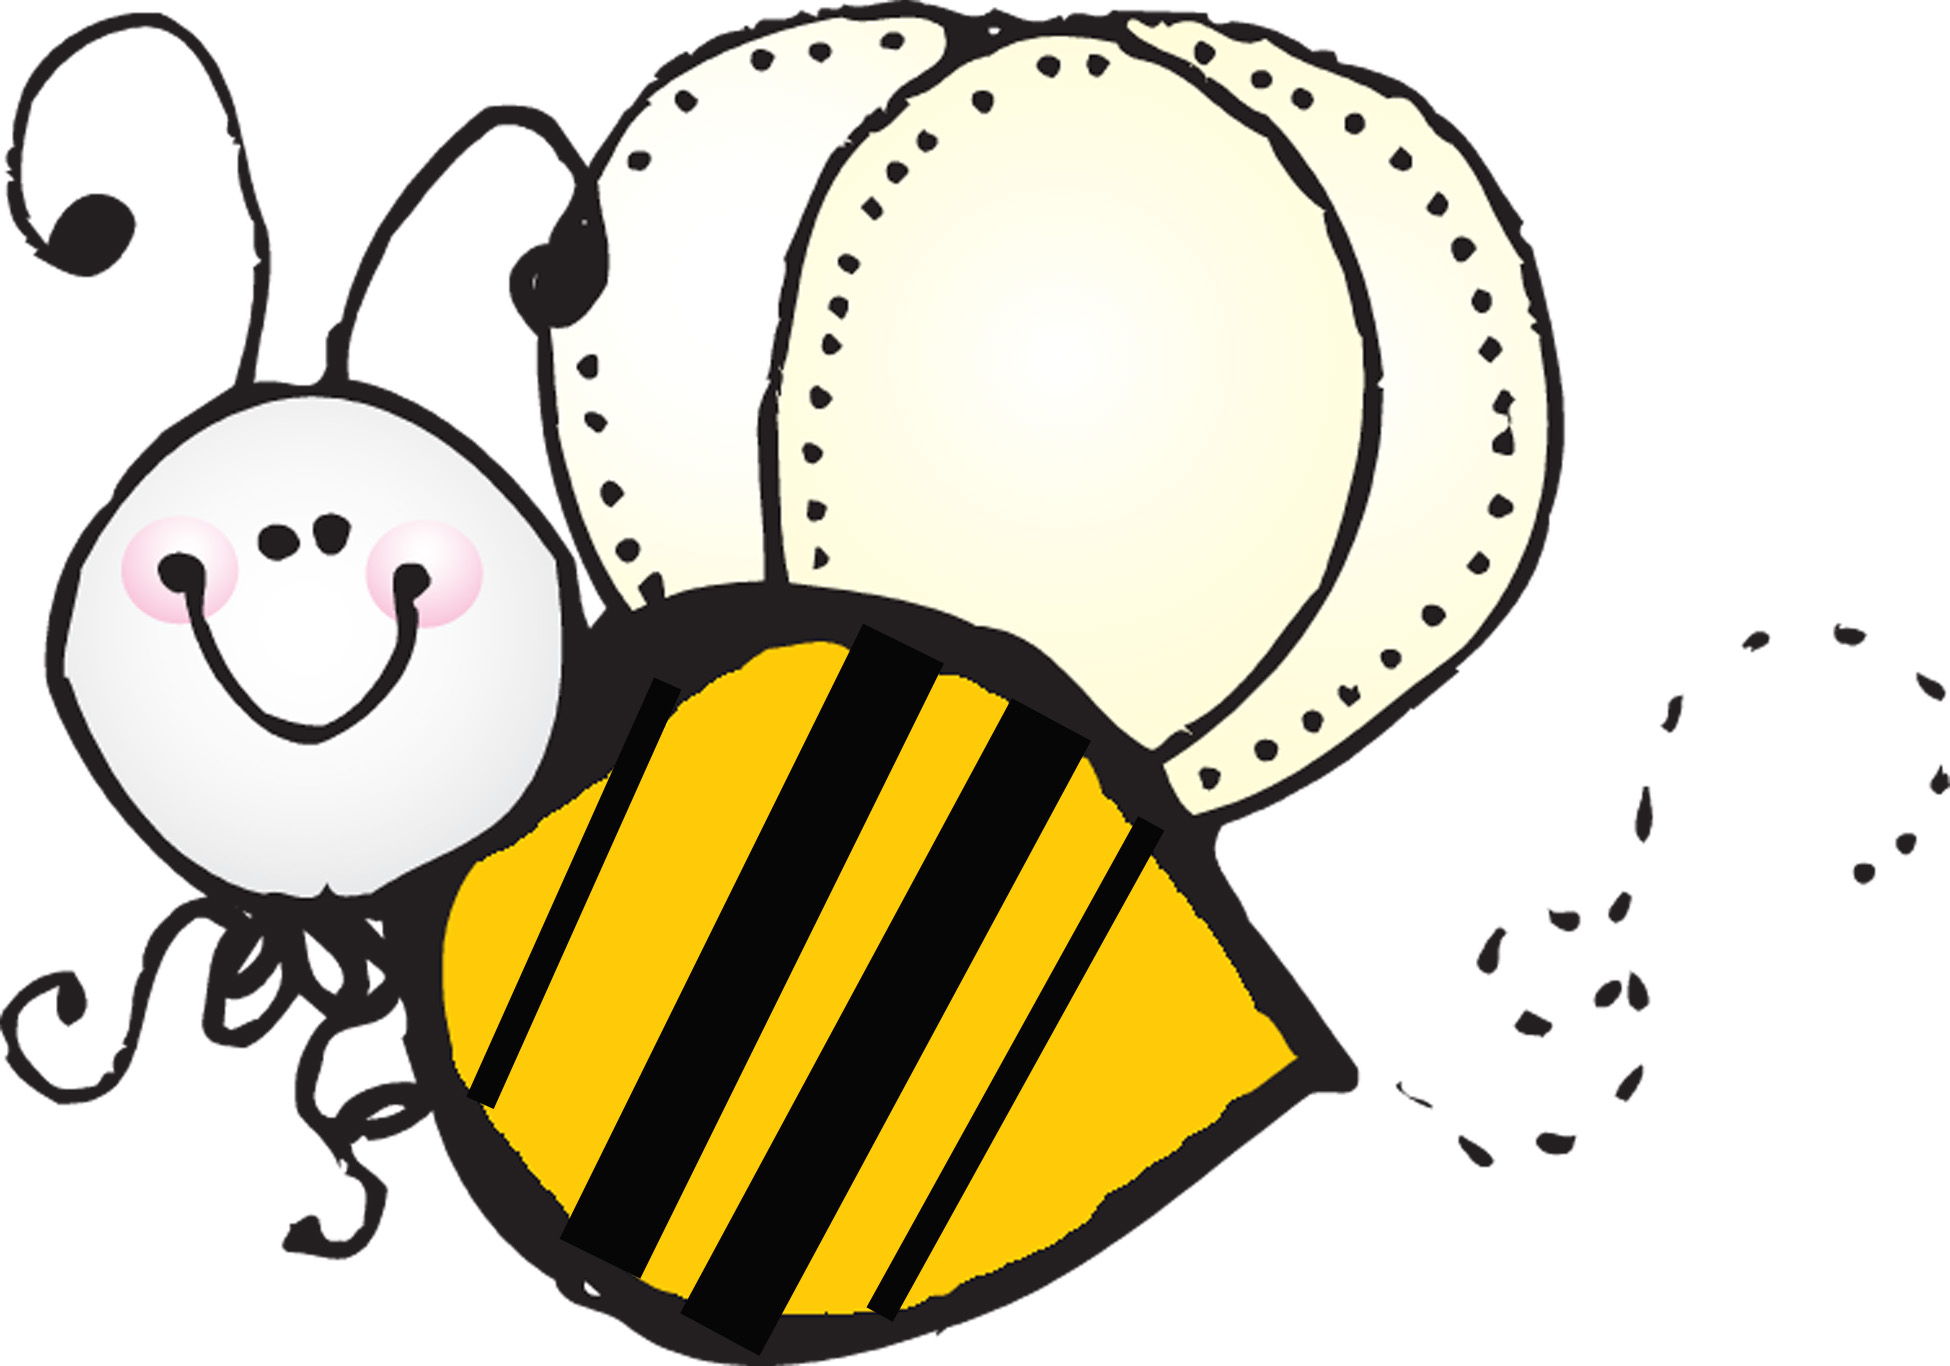 Bumble bee clipart clipart 